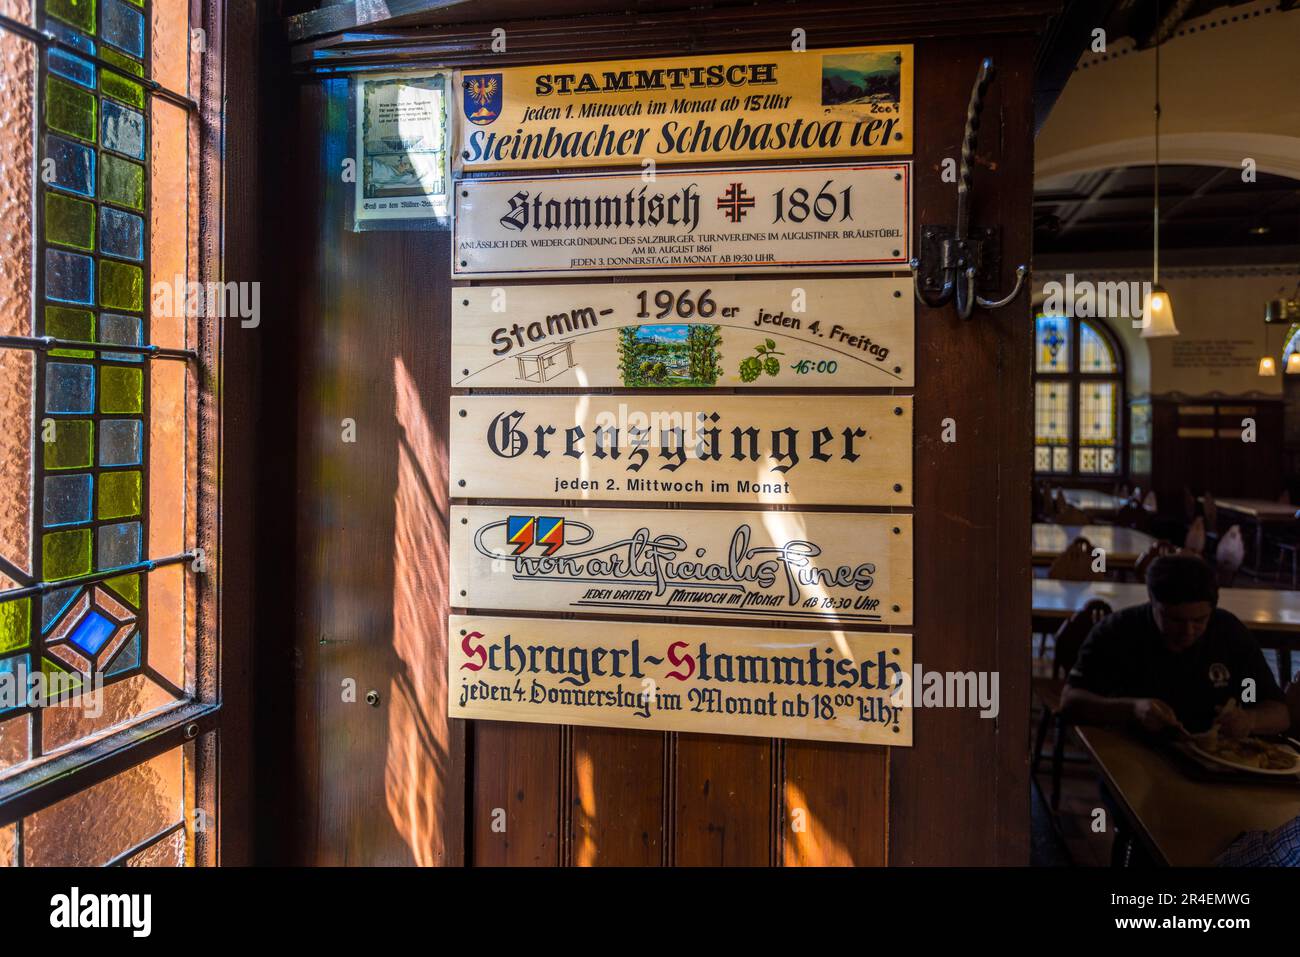 Stammtisch signs in the Stockhammer Hall of the Augustiner brewery, founded in 1621. The beer tavern is an institution for the people of Salzburg. A Stammtisch (cracker-barrel) consists of at least 8 people who meet once a month. Salzburg, Austria Stock Photo